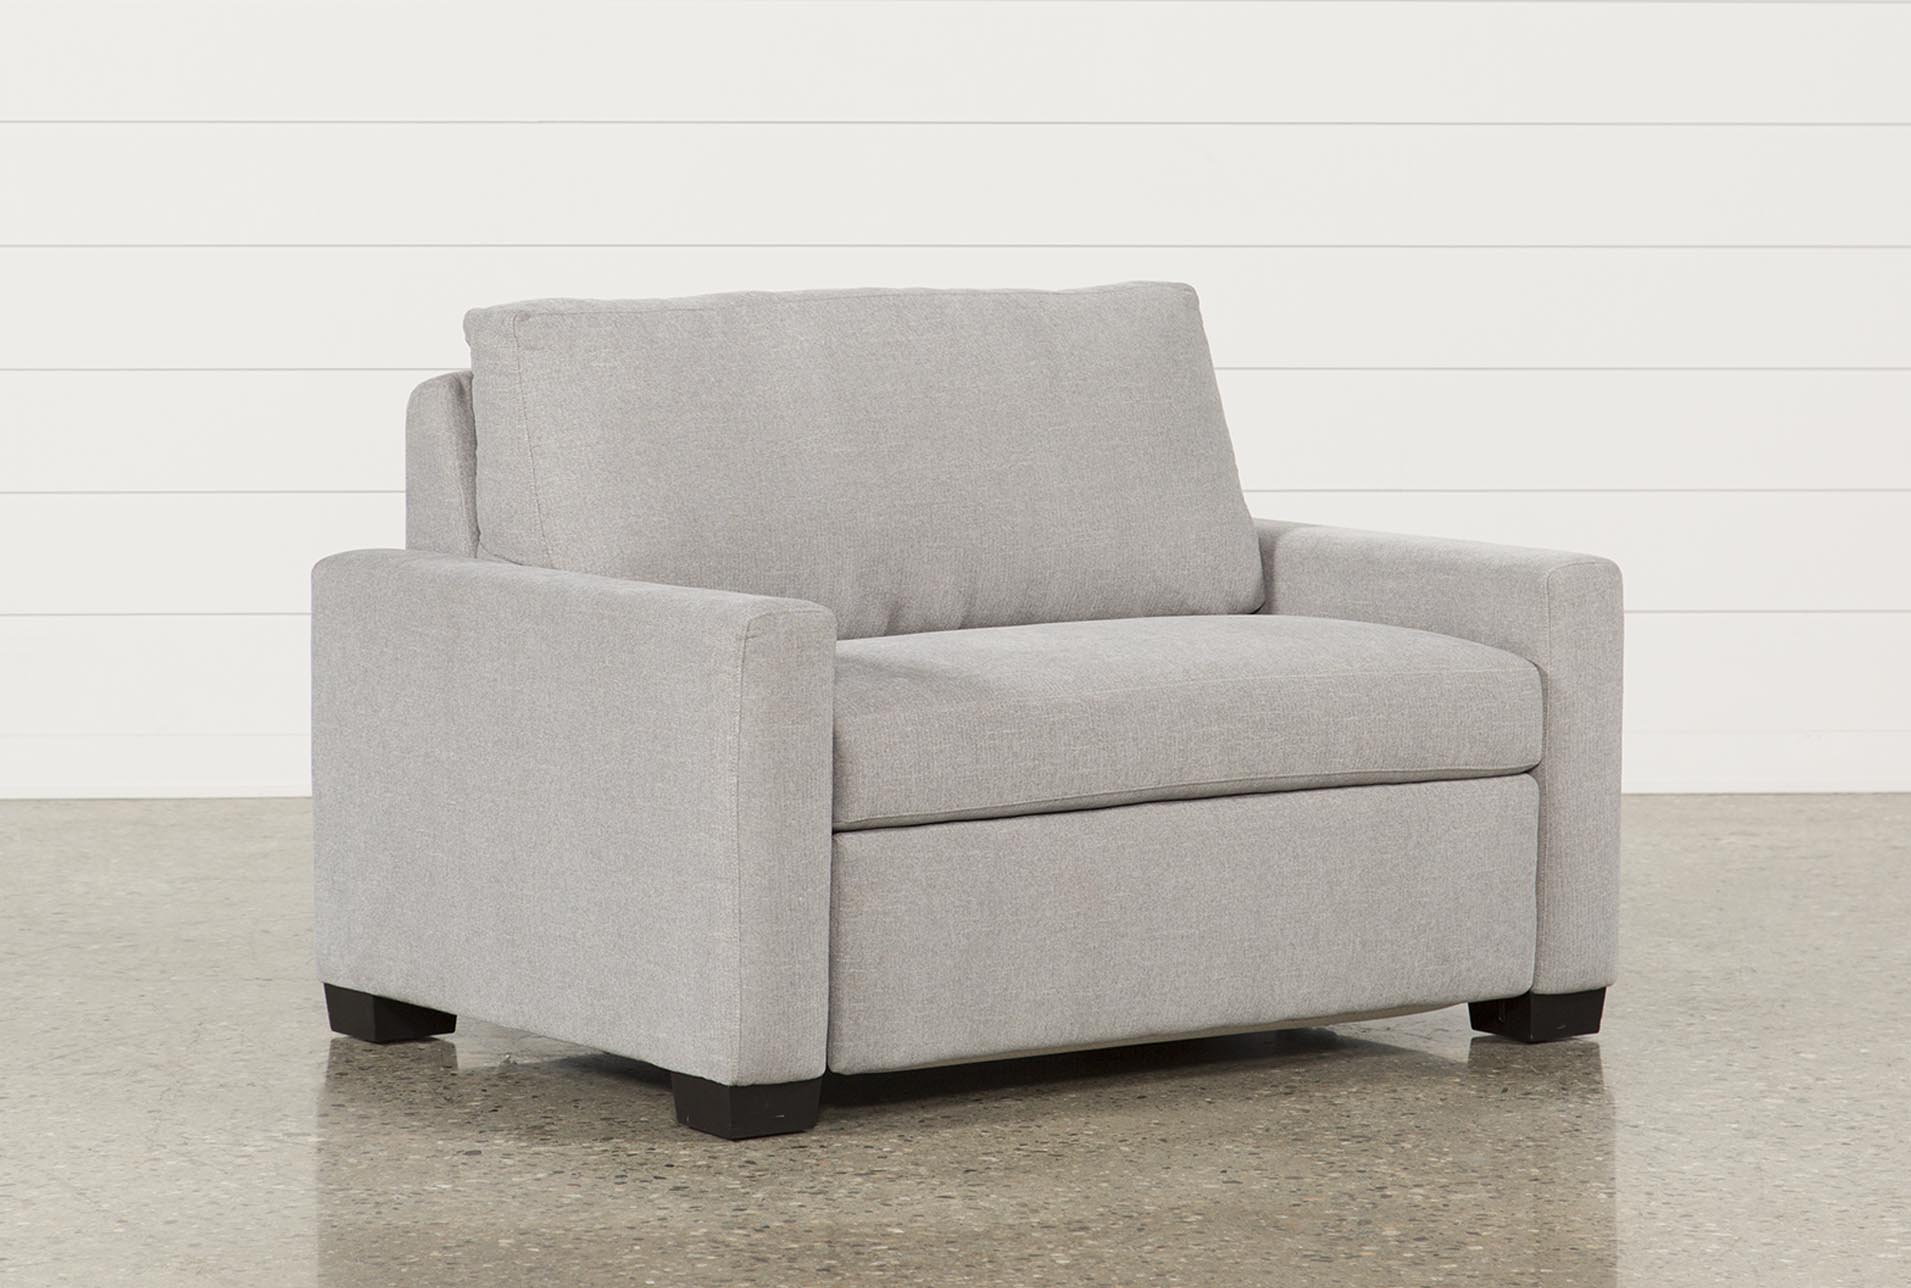 Mackenzie Silverpine Twin Sofa Sleeper (Qty: 1) has been successfully added  to your Cart.